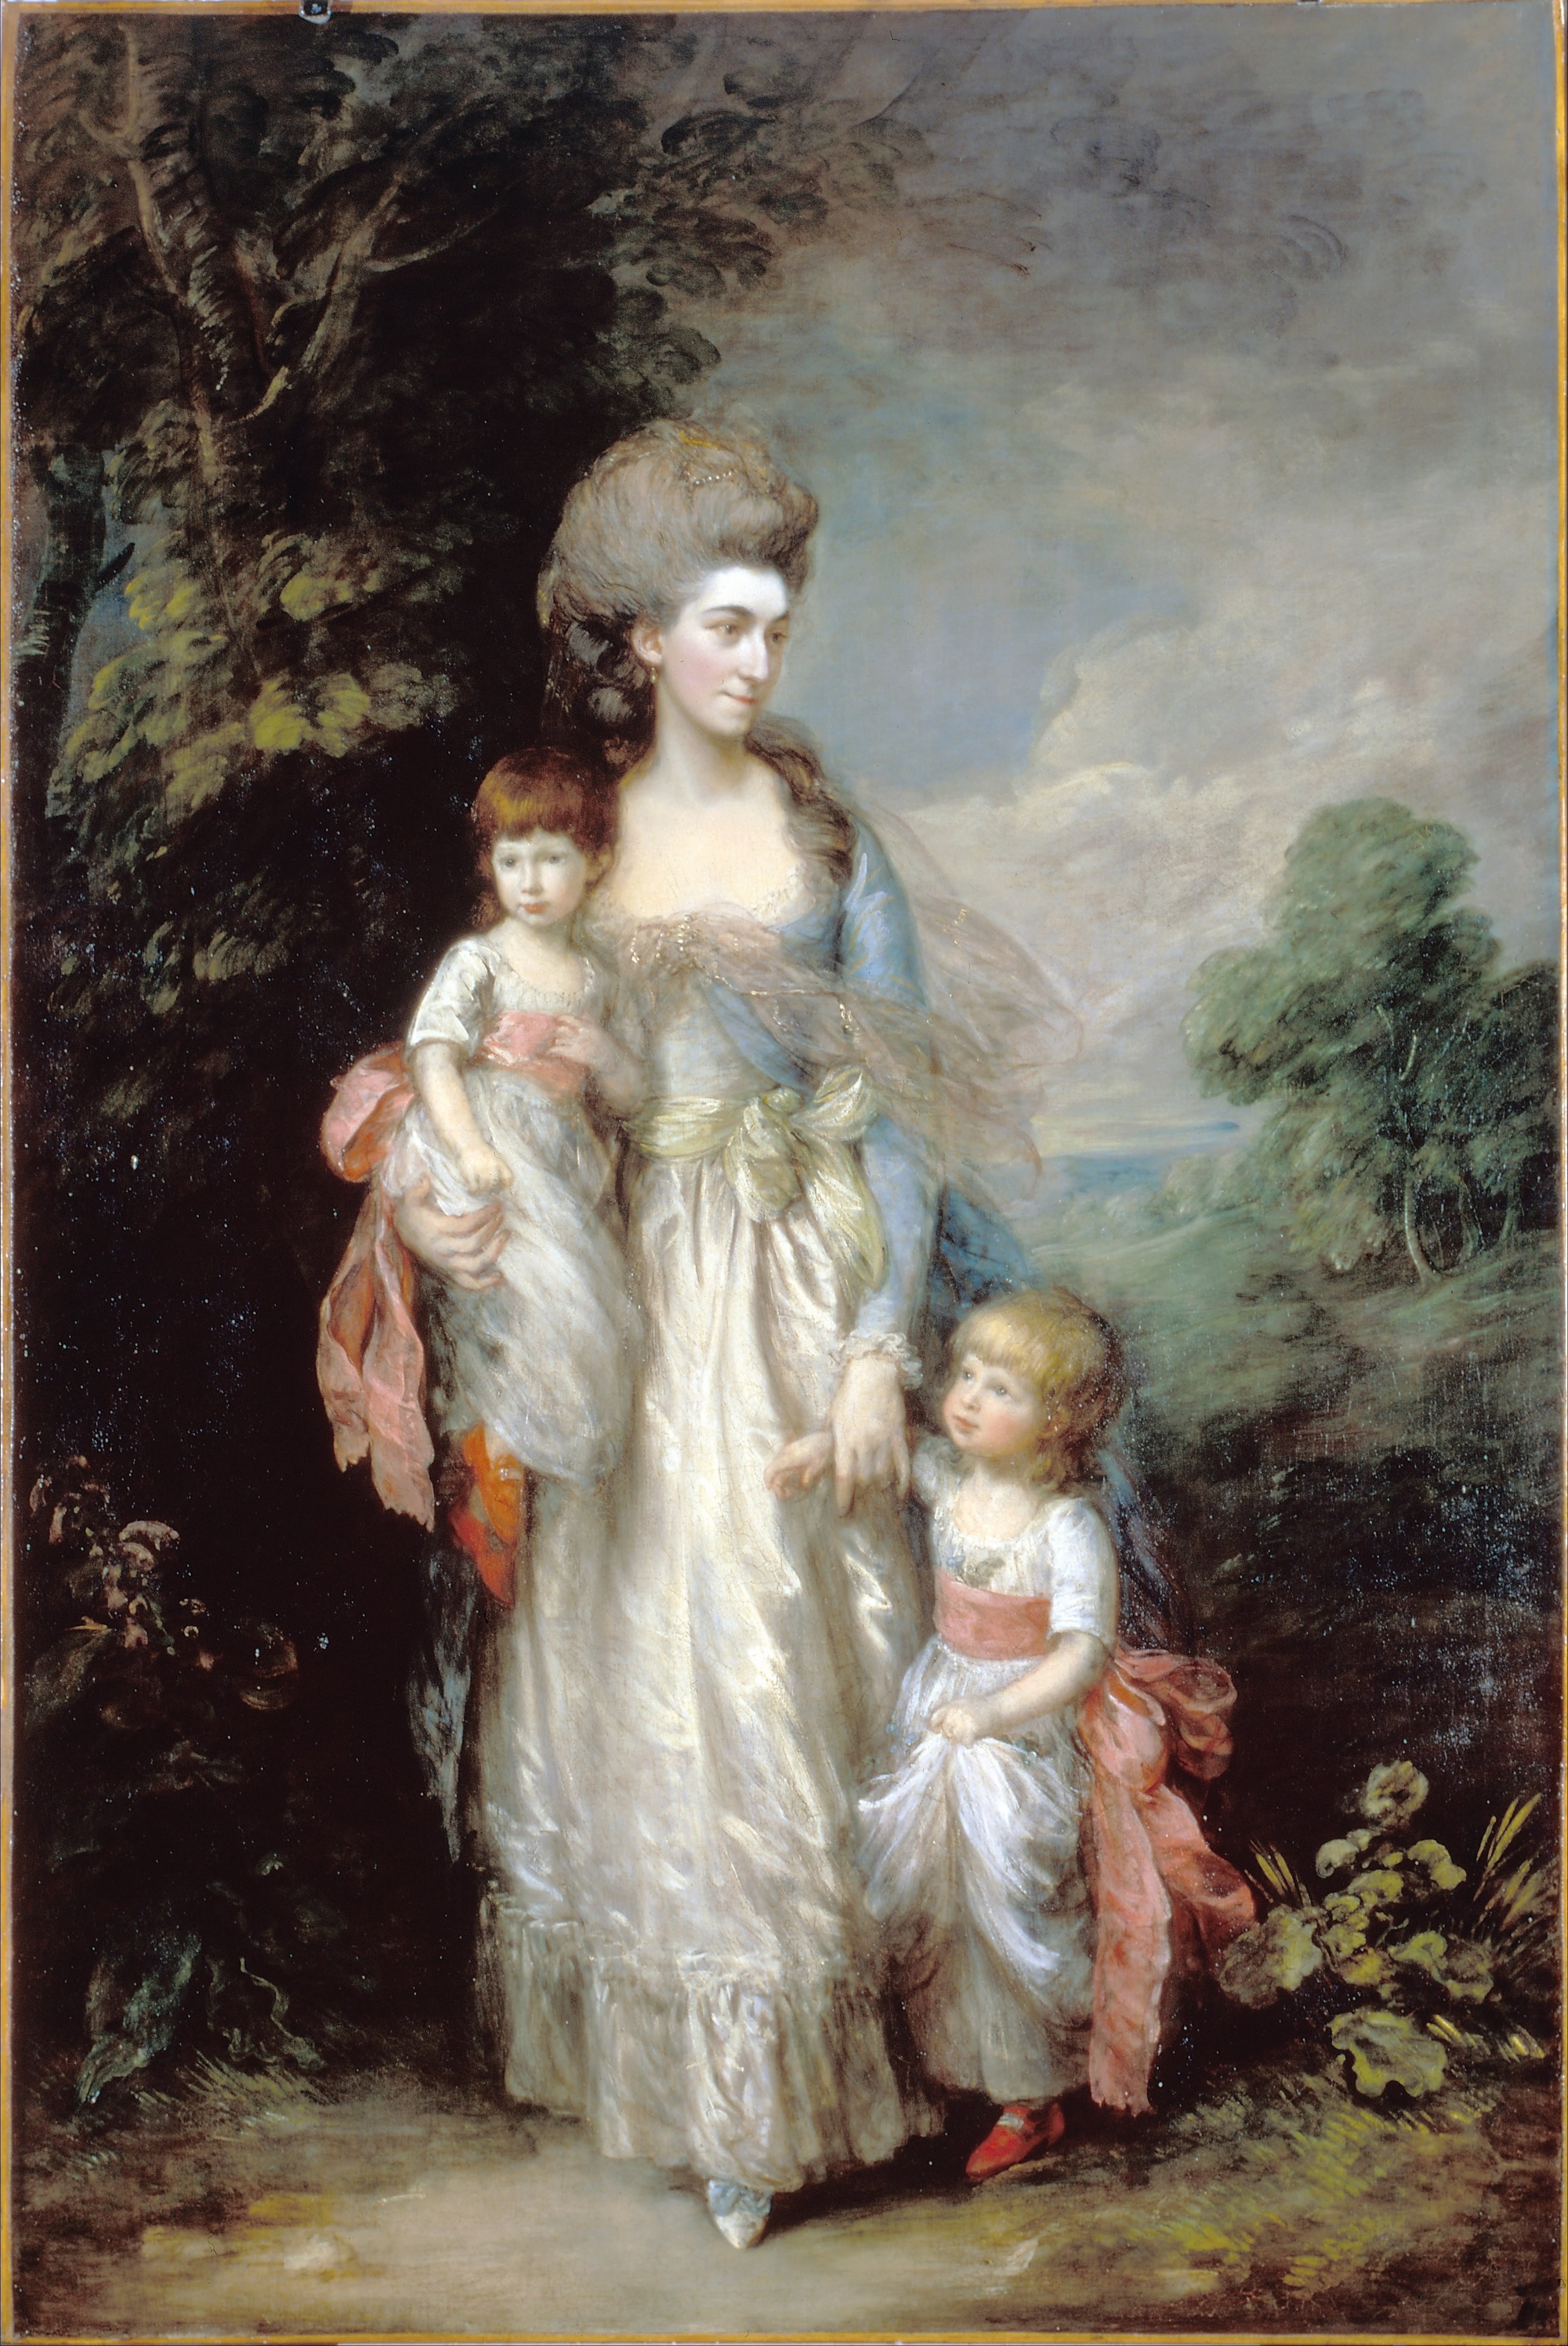 Gainsborough, Thomas - Mrs Elizabeth Moody with her sons Samuel and Thomas - Google Art Project